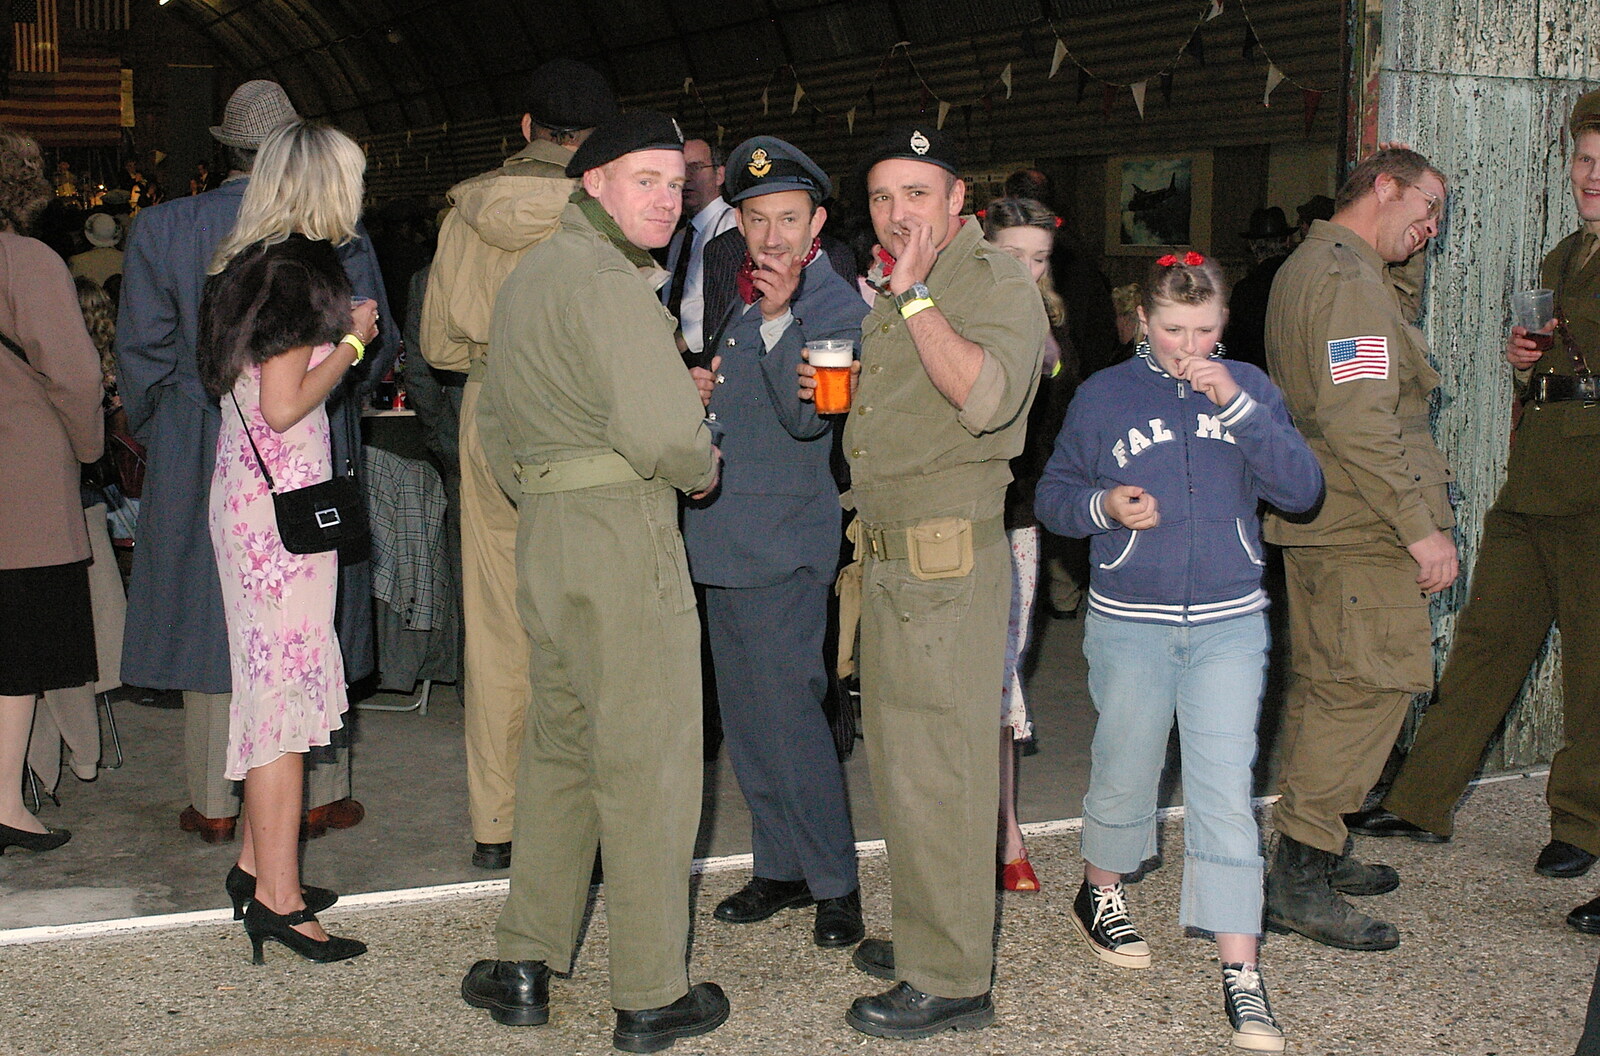 DH chats to the 'tank boys' from A 1940s VE Dance At Debach Airfield, Debach, Suffolk - 11th June 2005